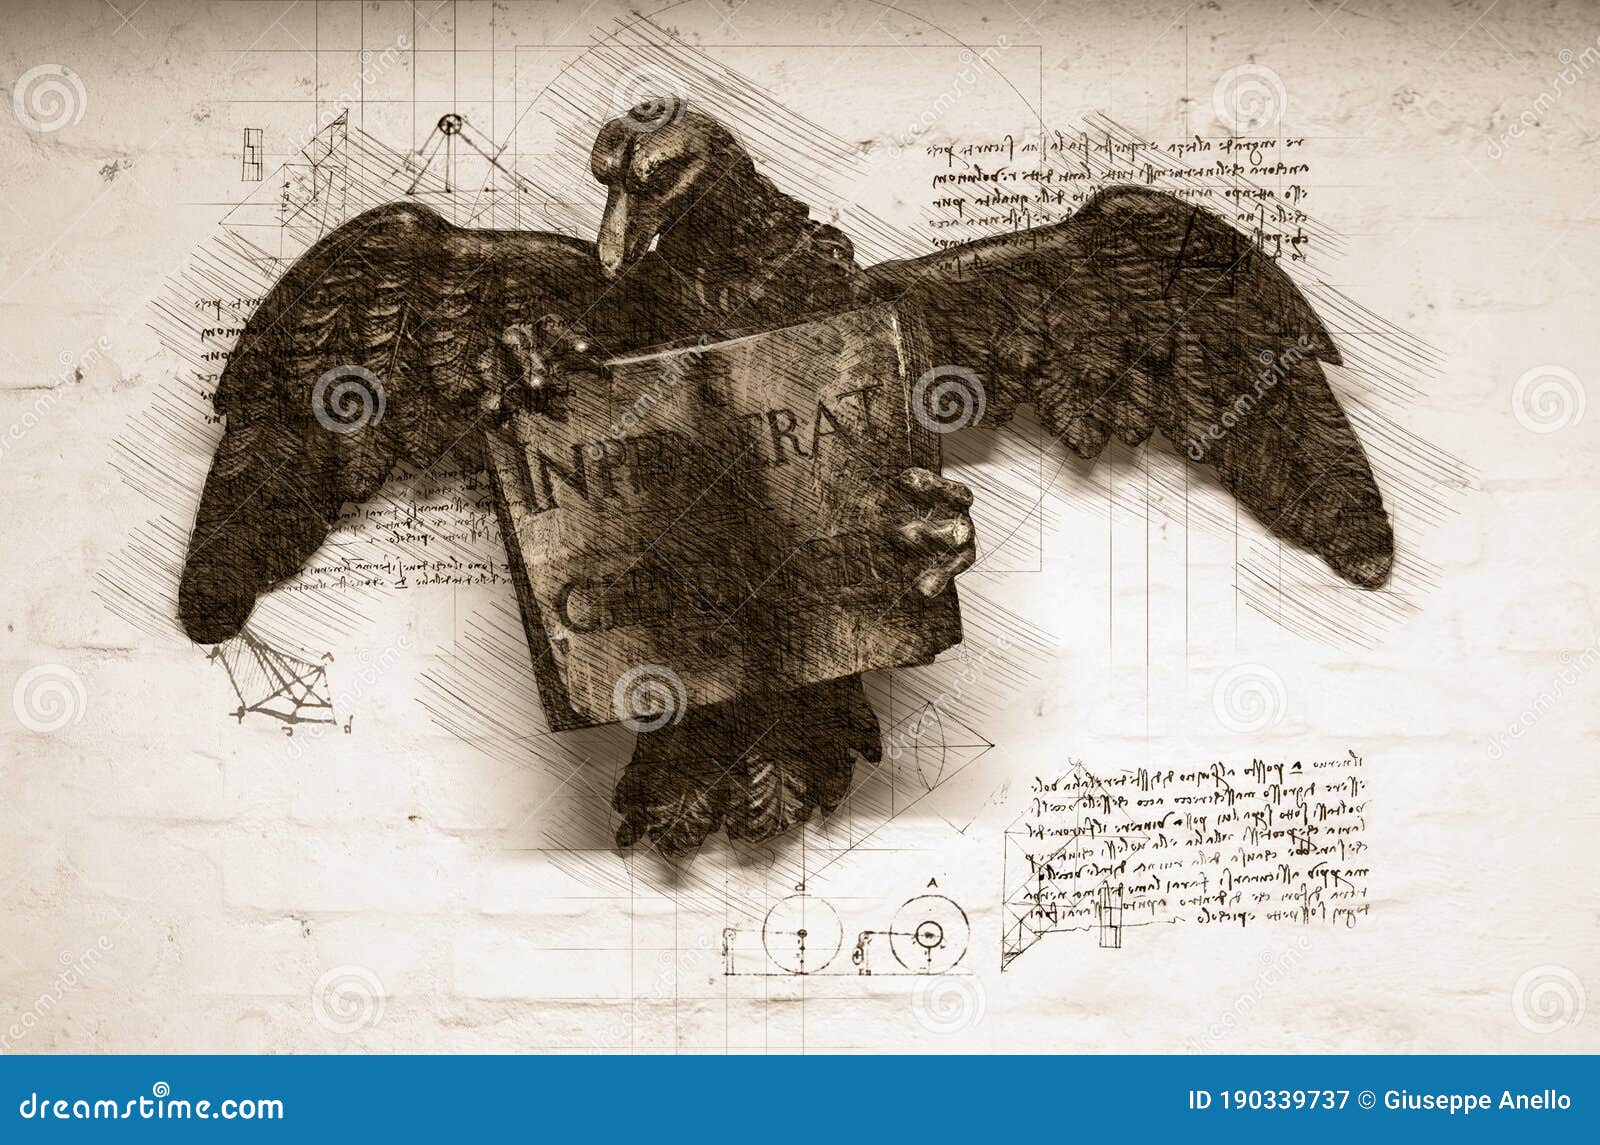 sketch of a wooden sculpture of an eagle holding a book